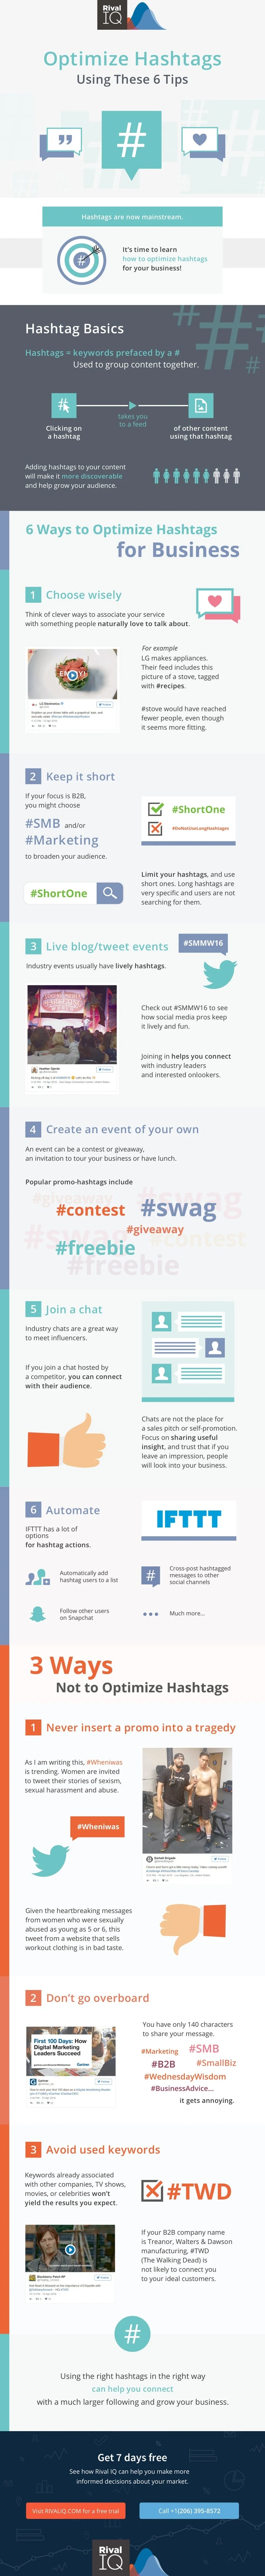 Optimize Hashtags Using These 6 Tips - #infographic